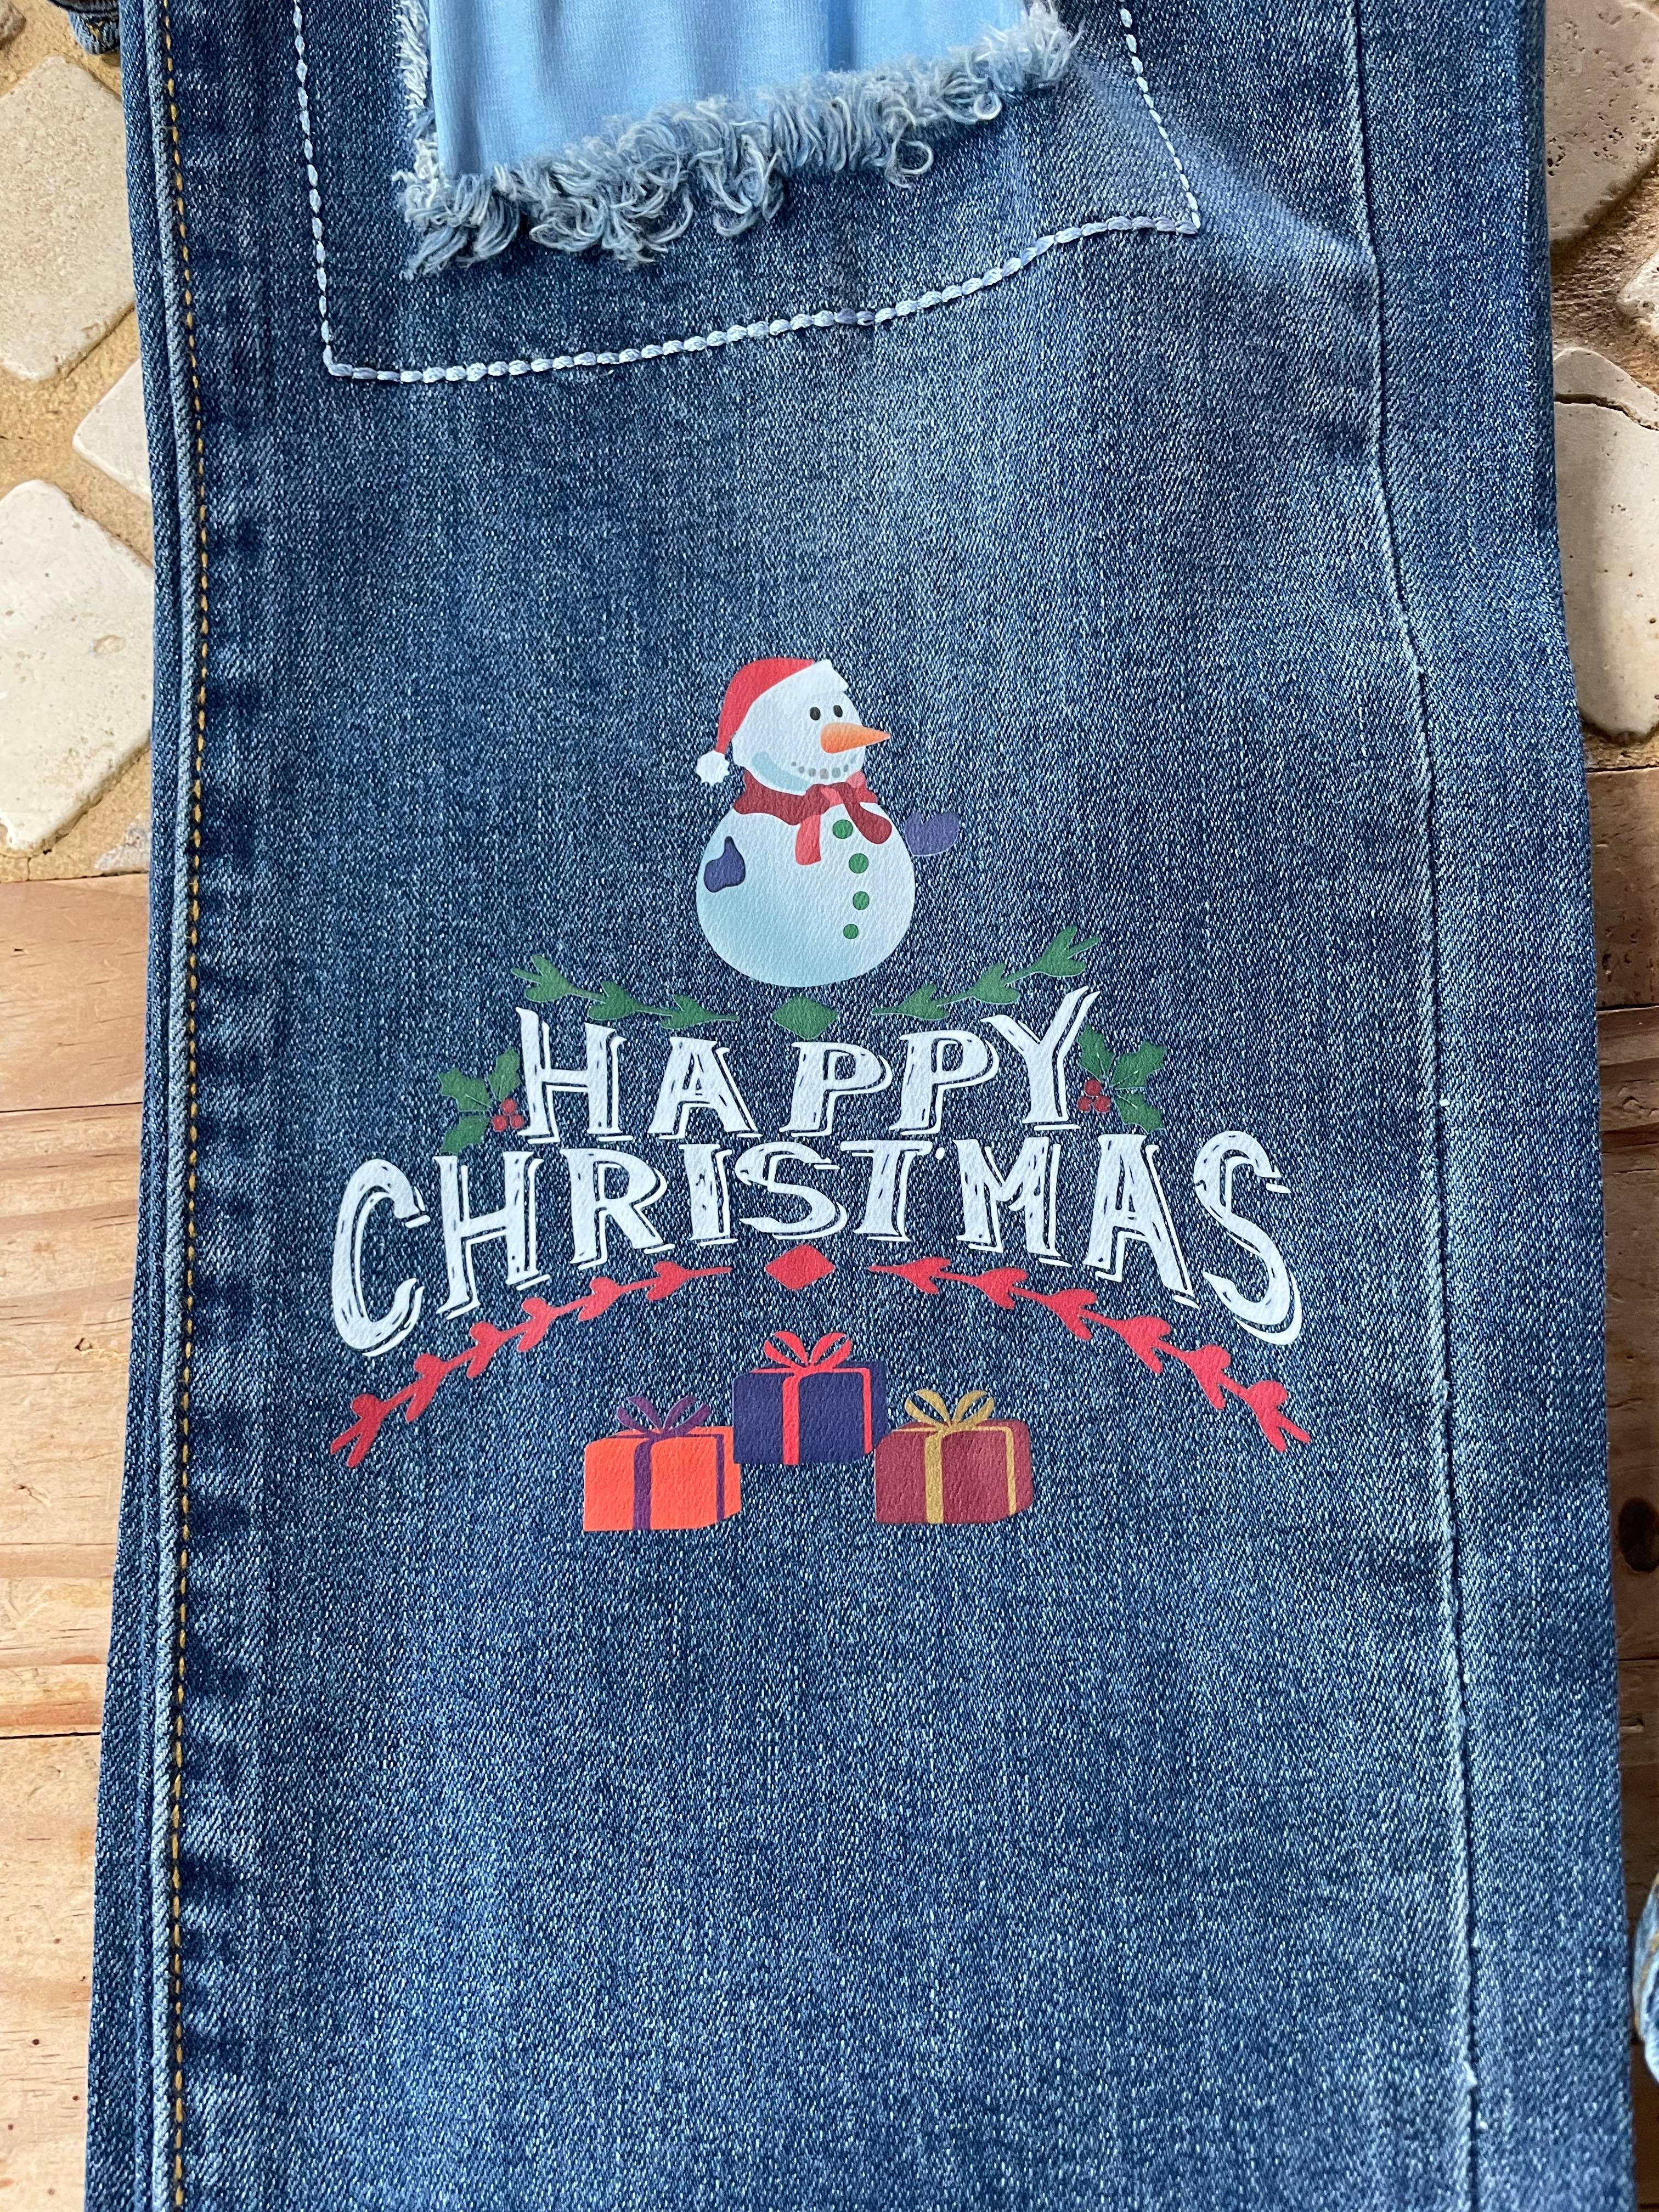 Snowman Jeans Christmas Patch work Jeans Different styles